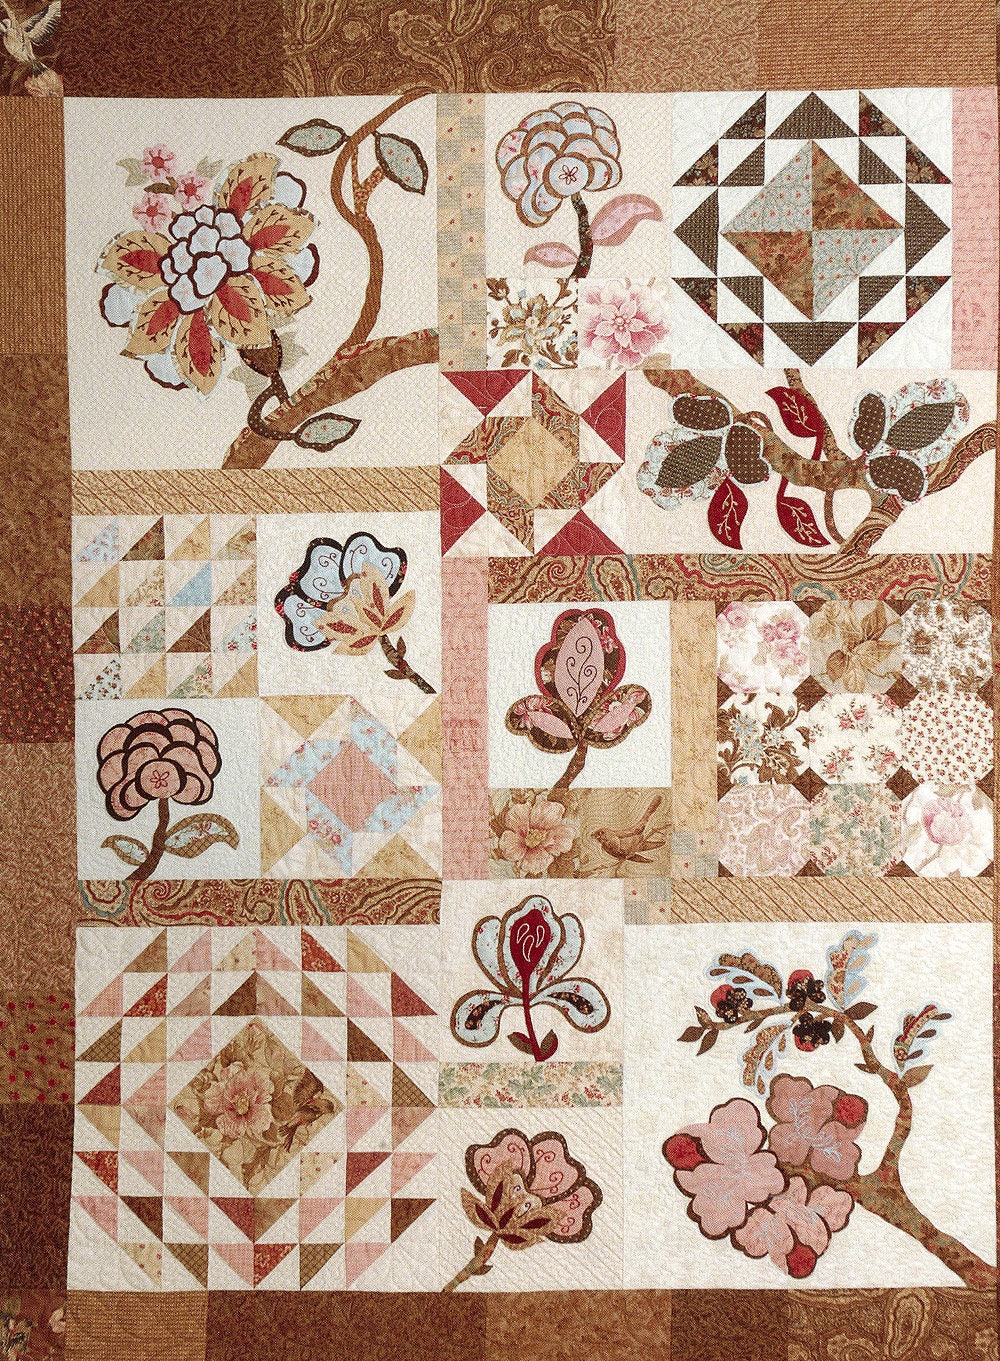 The Graceful Garden Quilt Pattern Book by Denise Sheehan for Kansas City Star Quilts